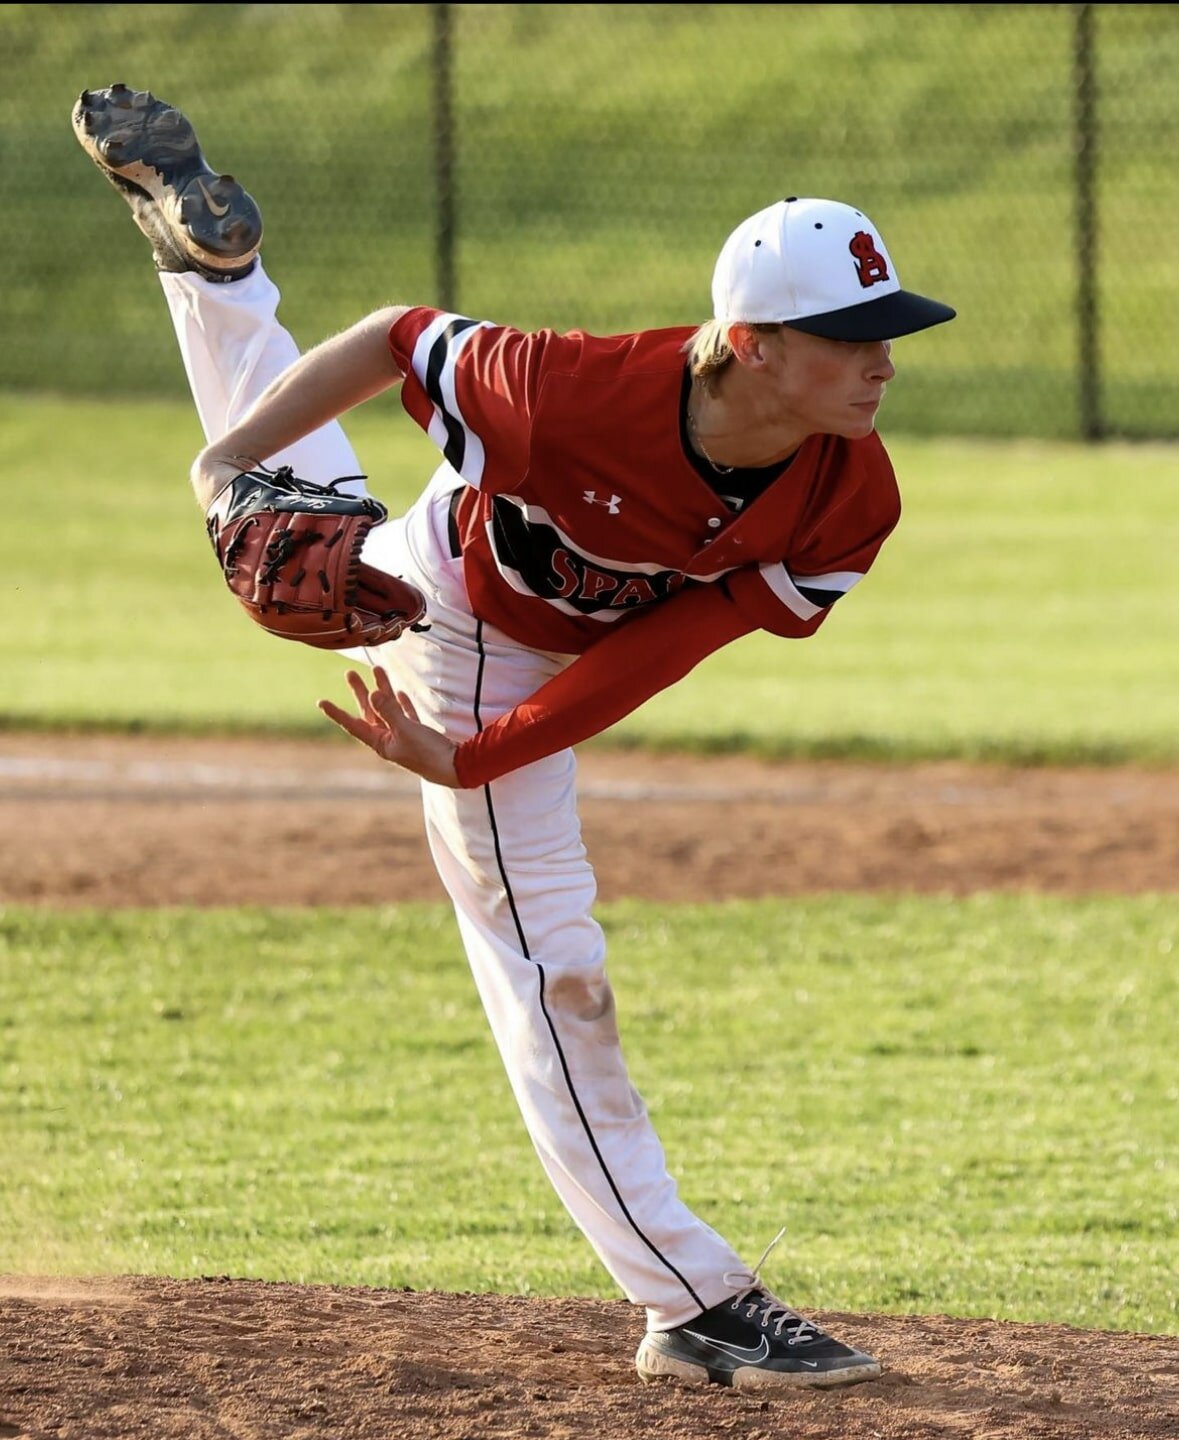 Cody Sharman went 7-2 in his 10 starts for Archbishop Spalding, with a 0.85 ERA and a 0.80 WHIP. He struck out 60 batters while allowing just eight walks and tossed four complete games.